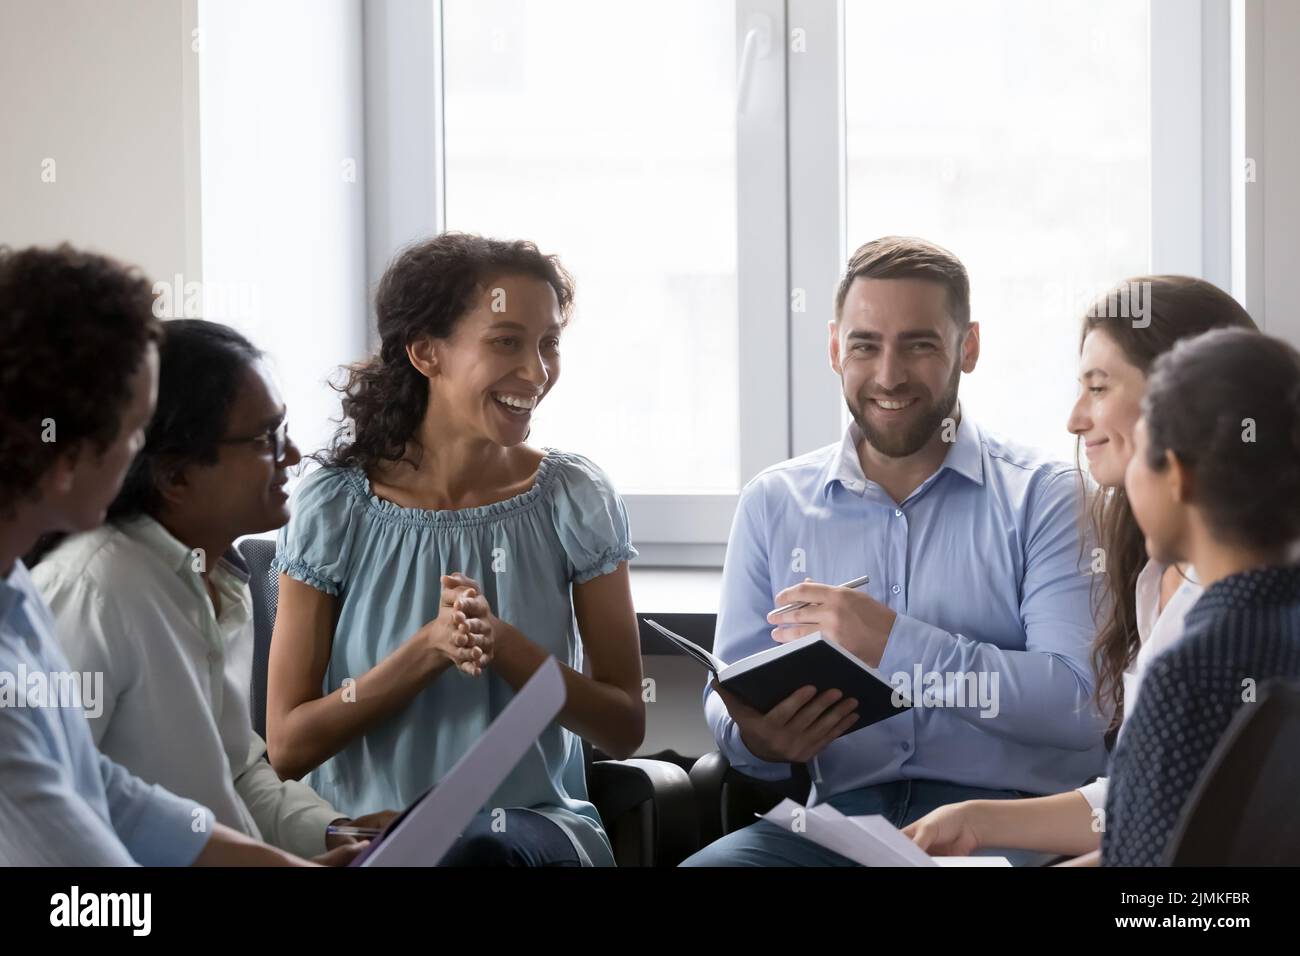 Smiling multiracial colleagues take part in motivational training at workplace Stock Photo